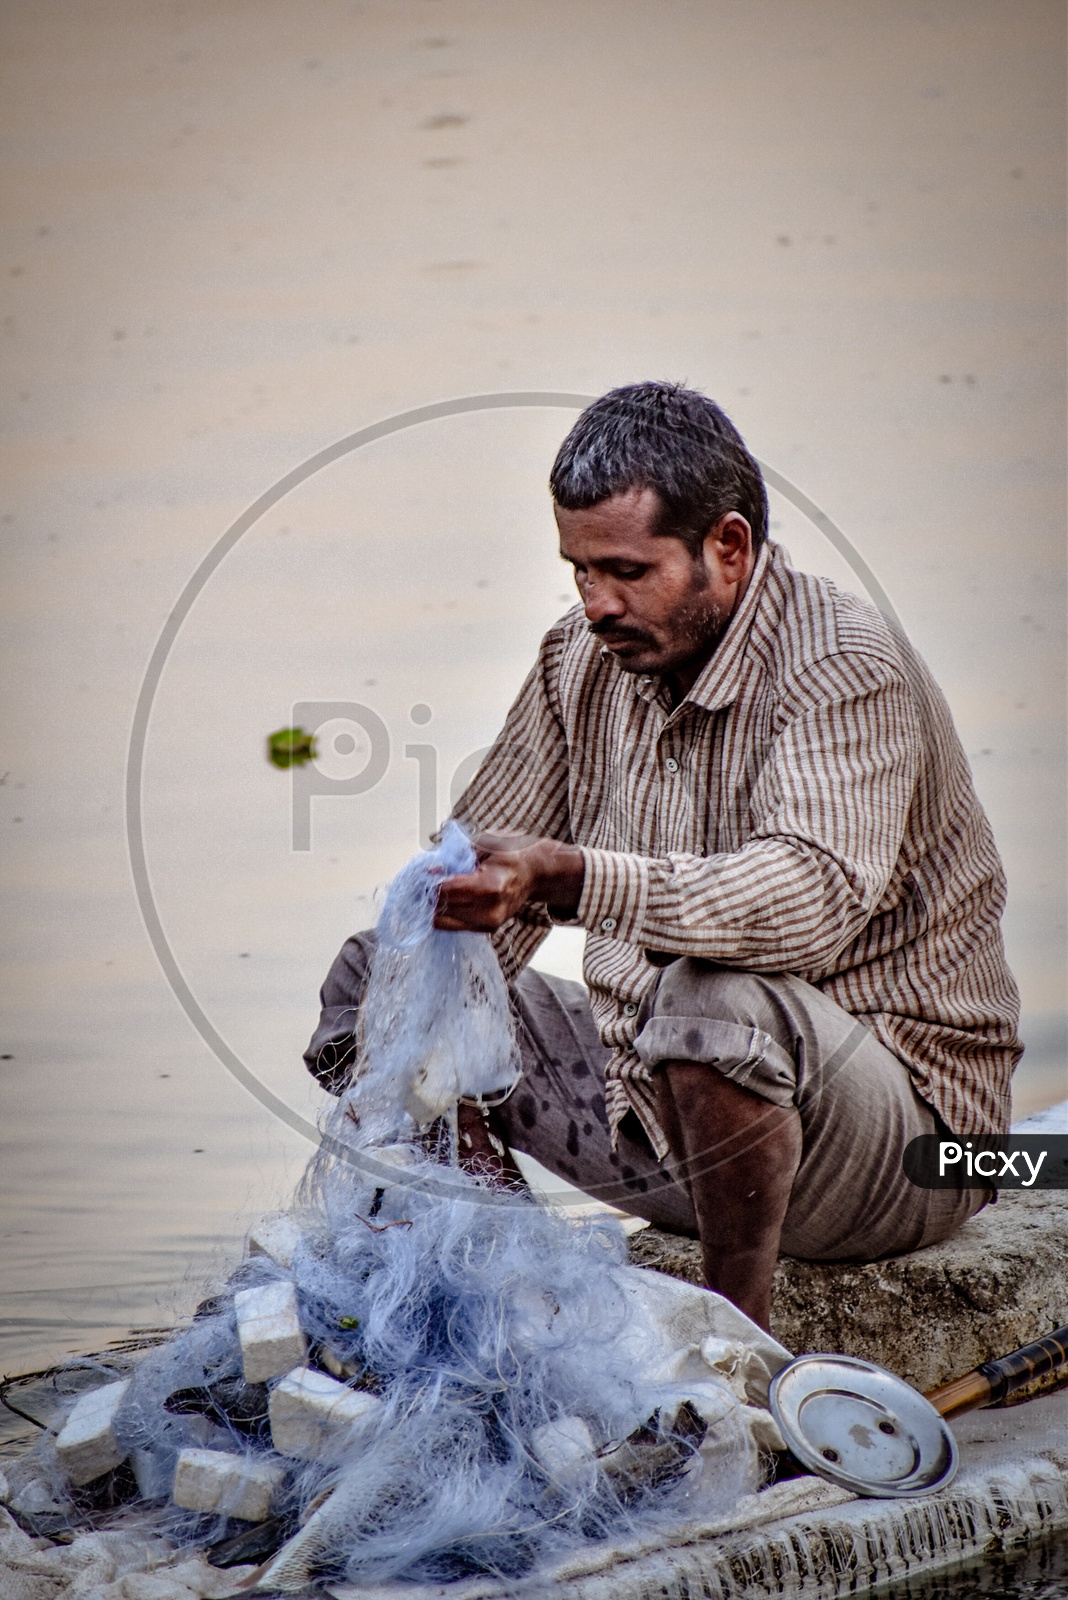 A Fisherman Doing His Daily Work